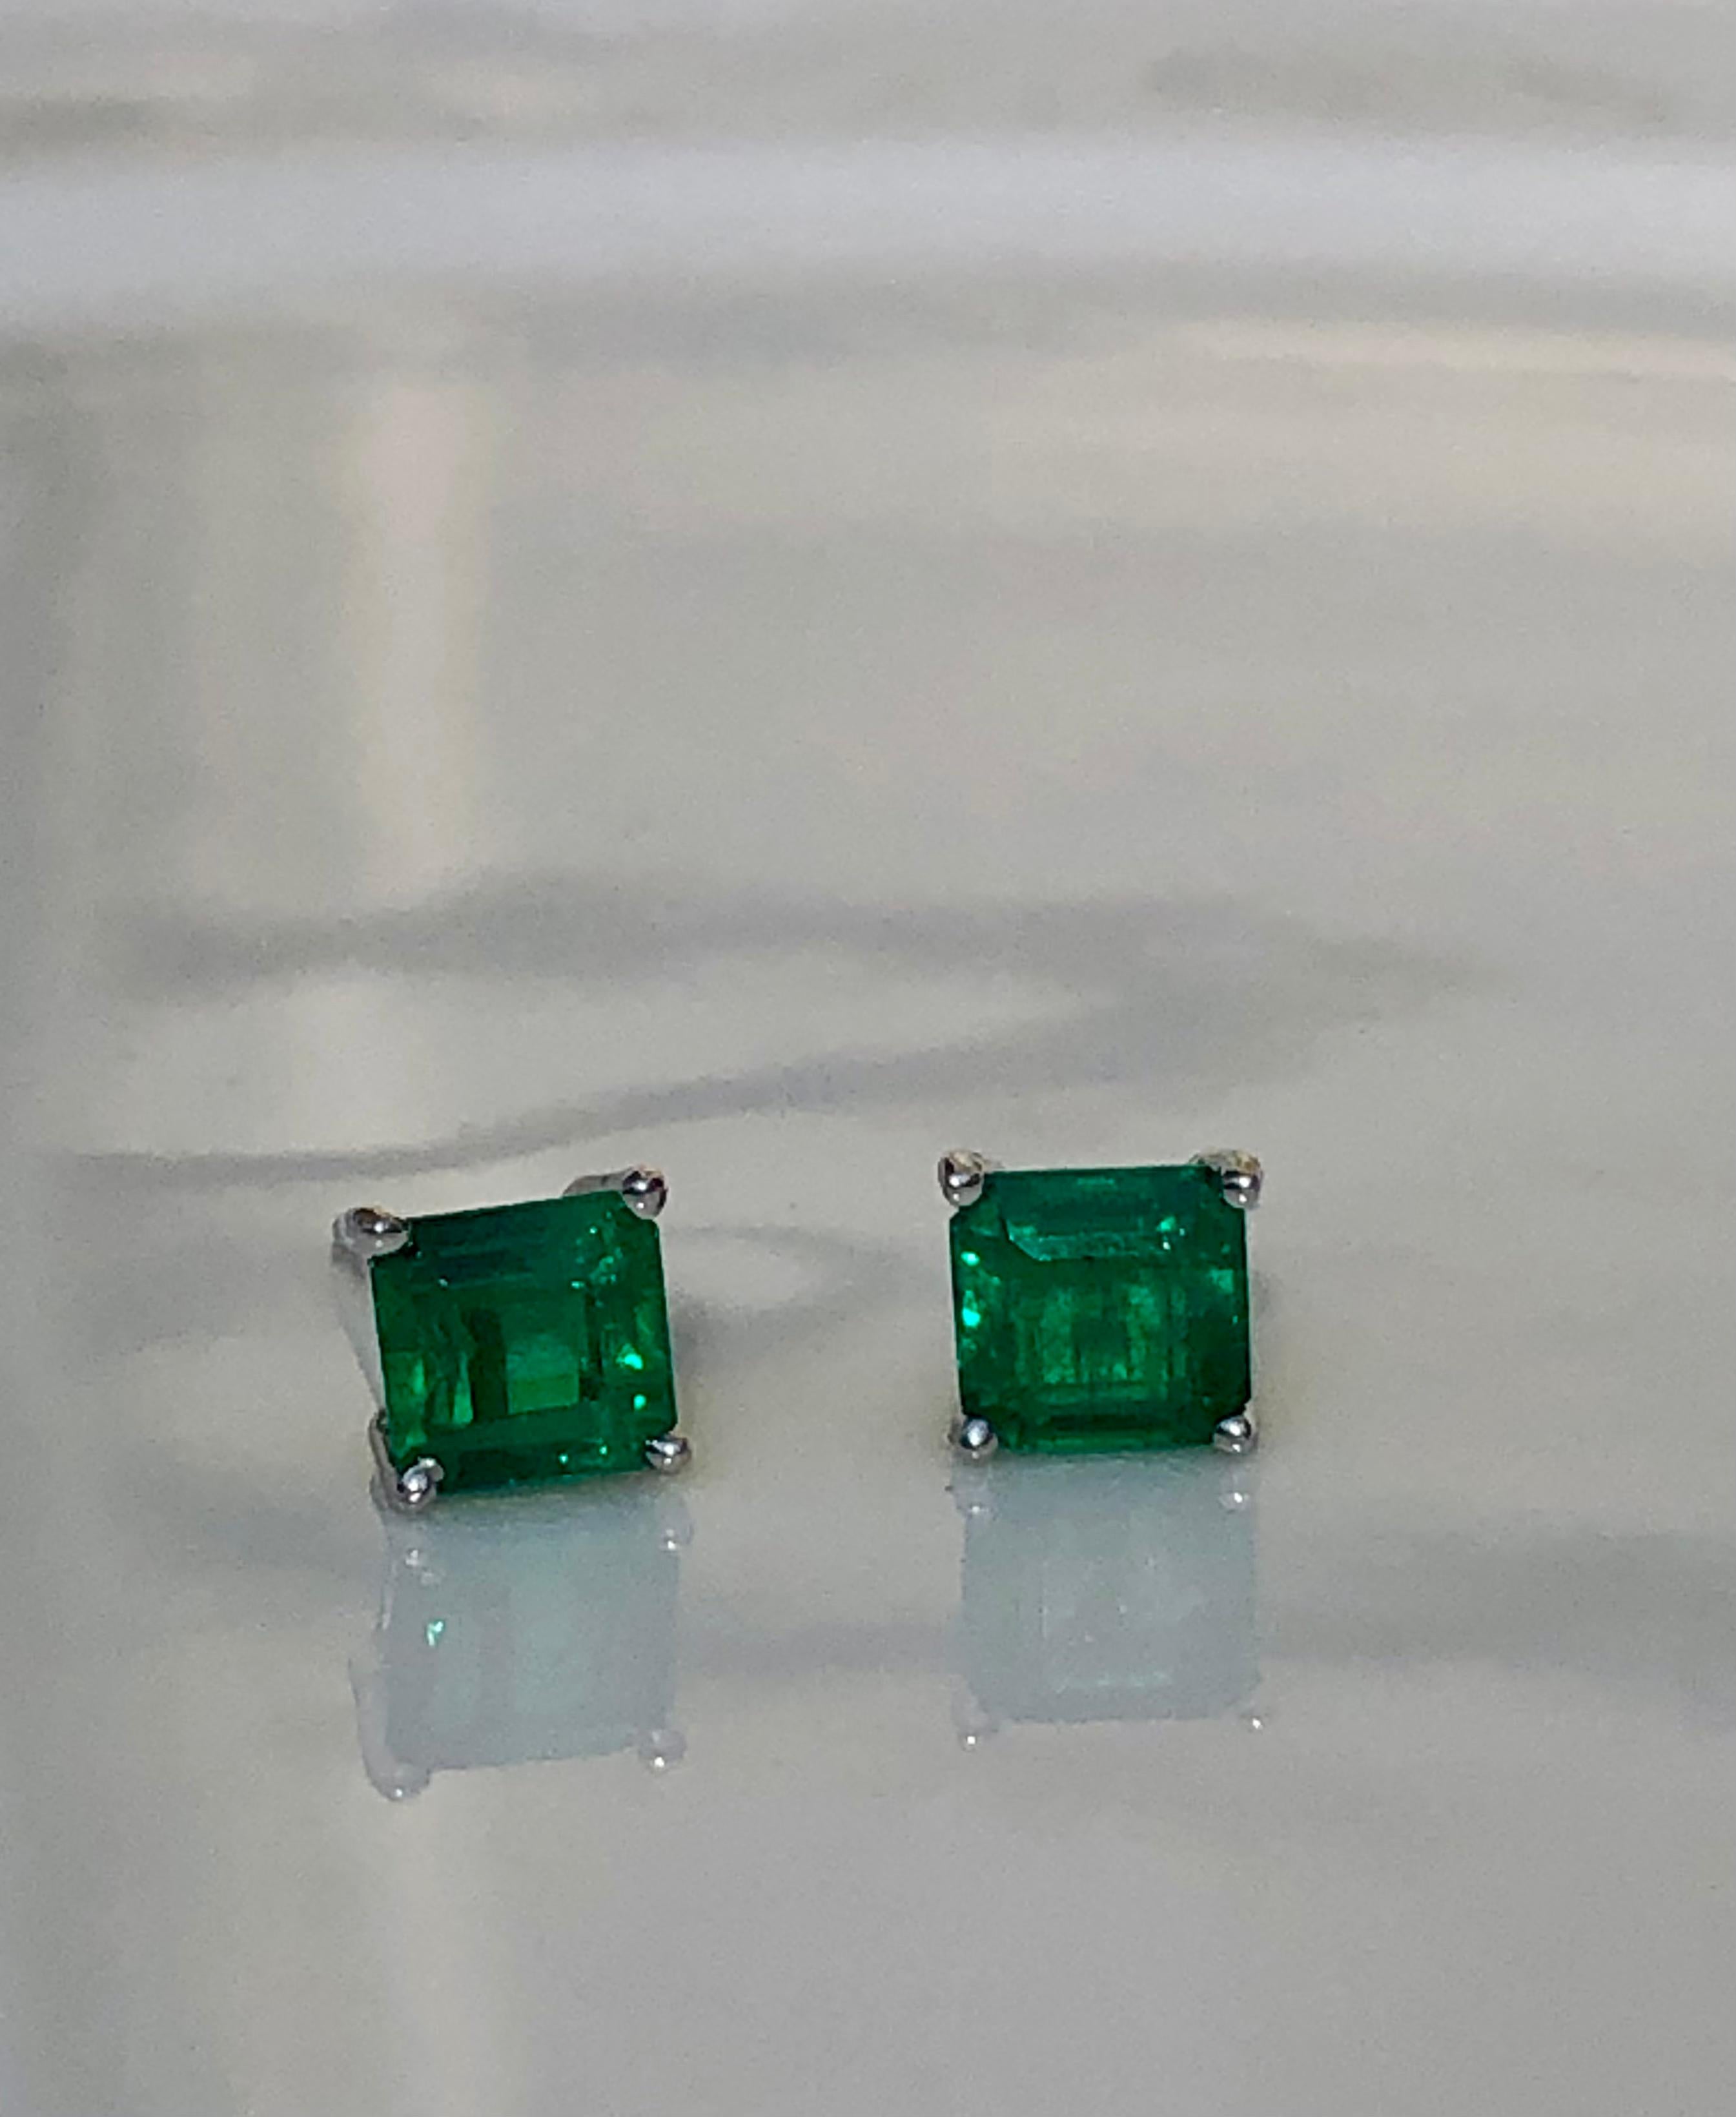 Primary Stones: 100% Natural Colombian Emeralds
Color/Clarity: AAA FINE Medium Green Color/ Clarity, VS
Total Gemstones Weight:  1.20 carats
Shape or Cut: Emerald Cut
Earrings Measurement: 5.19mm x 5.00mm
Comments: Gorgeous Color and